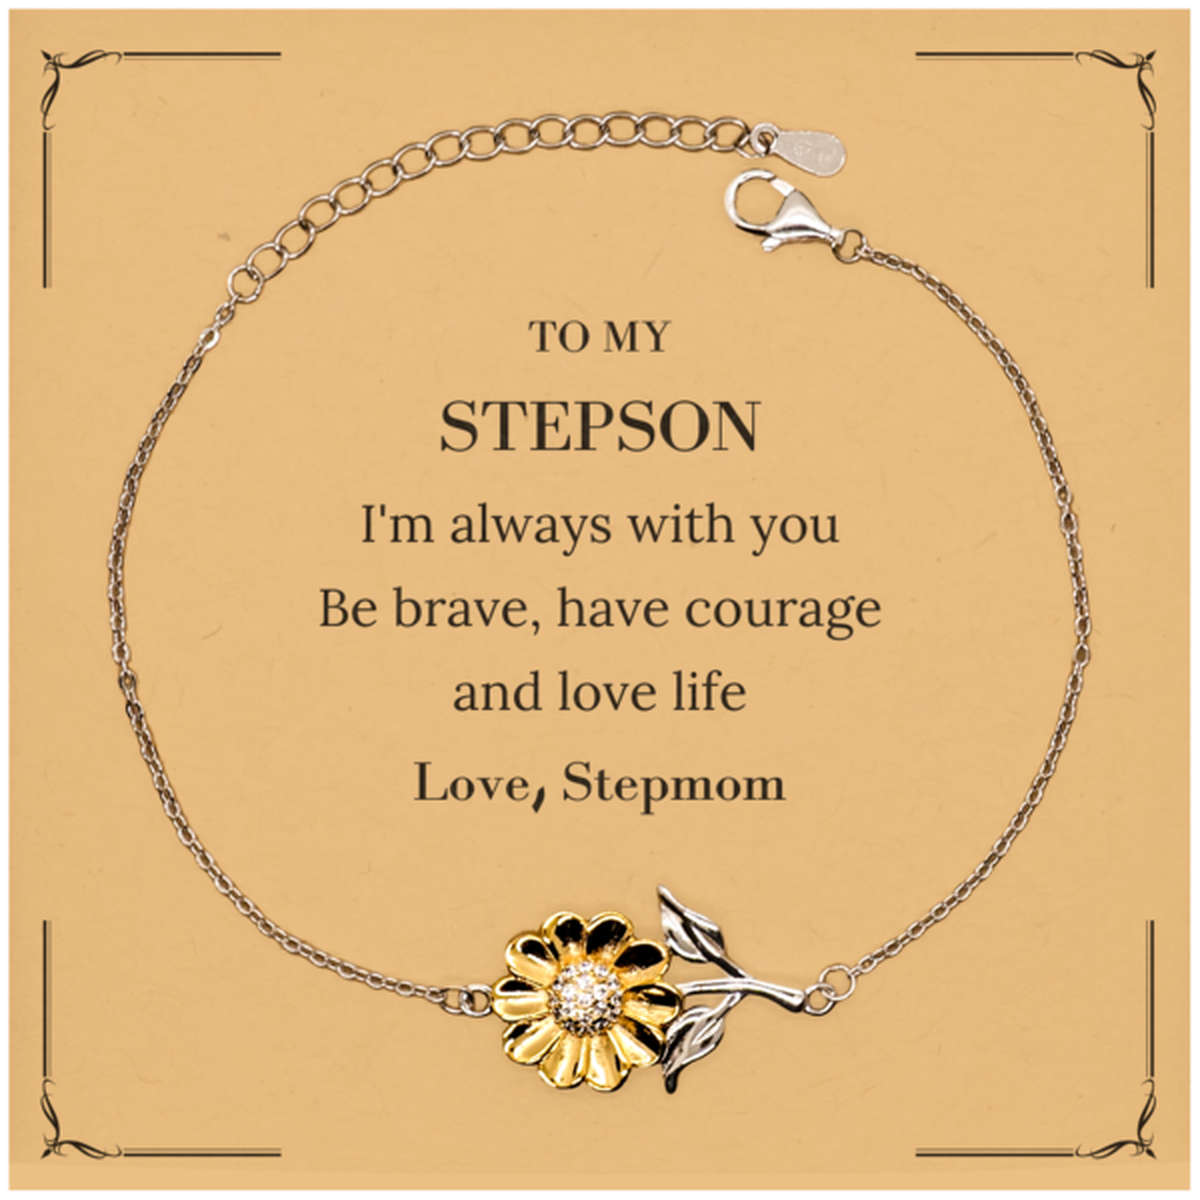 To My Stepson Gifts from Stepmom, Unique Sunflower Bracelet Inspirational Christmas Birthday Graduation Gifts for Stepson I'm always with you. Be brave, have courage and love life. Love, Stepmom